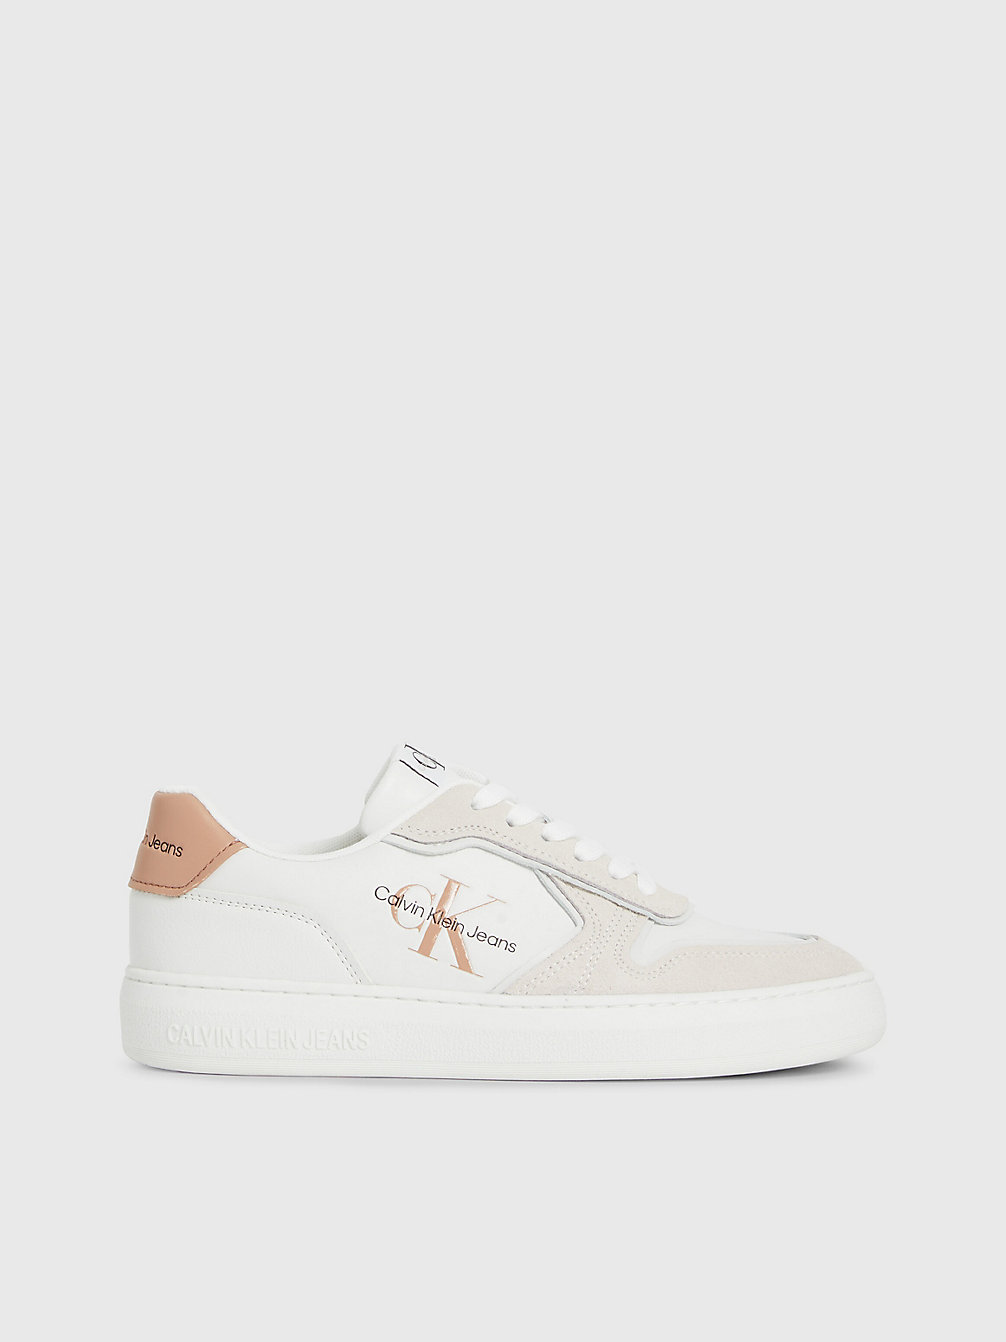 WHITE/ANCIENT WHITE > Suède Sneakers > undefined dames - Calvin Klein